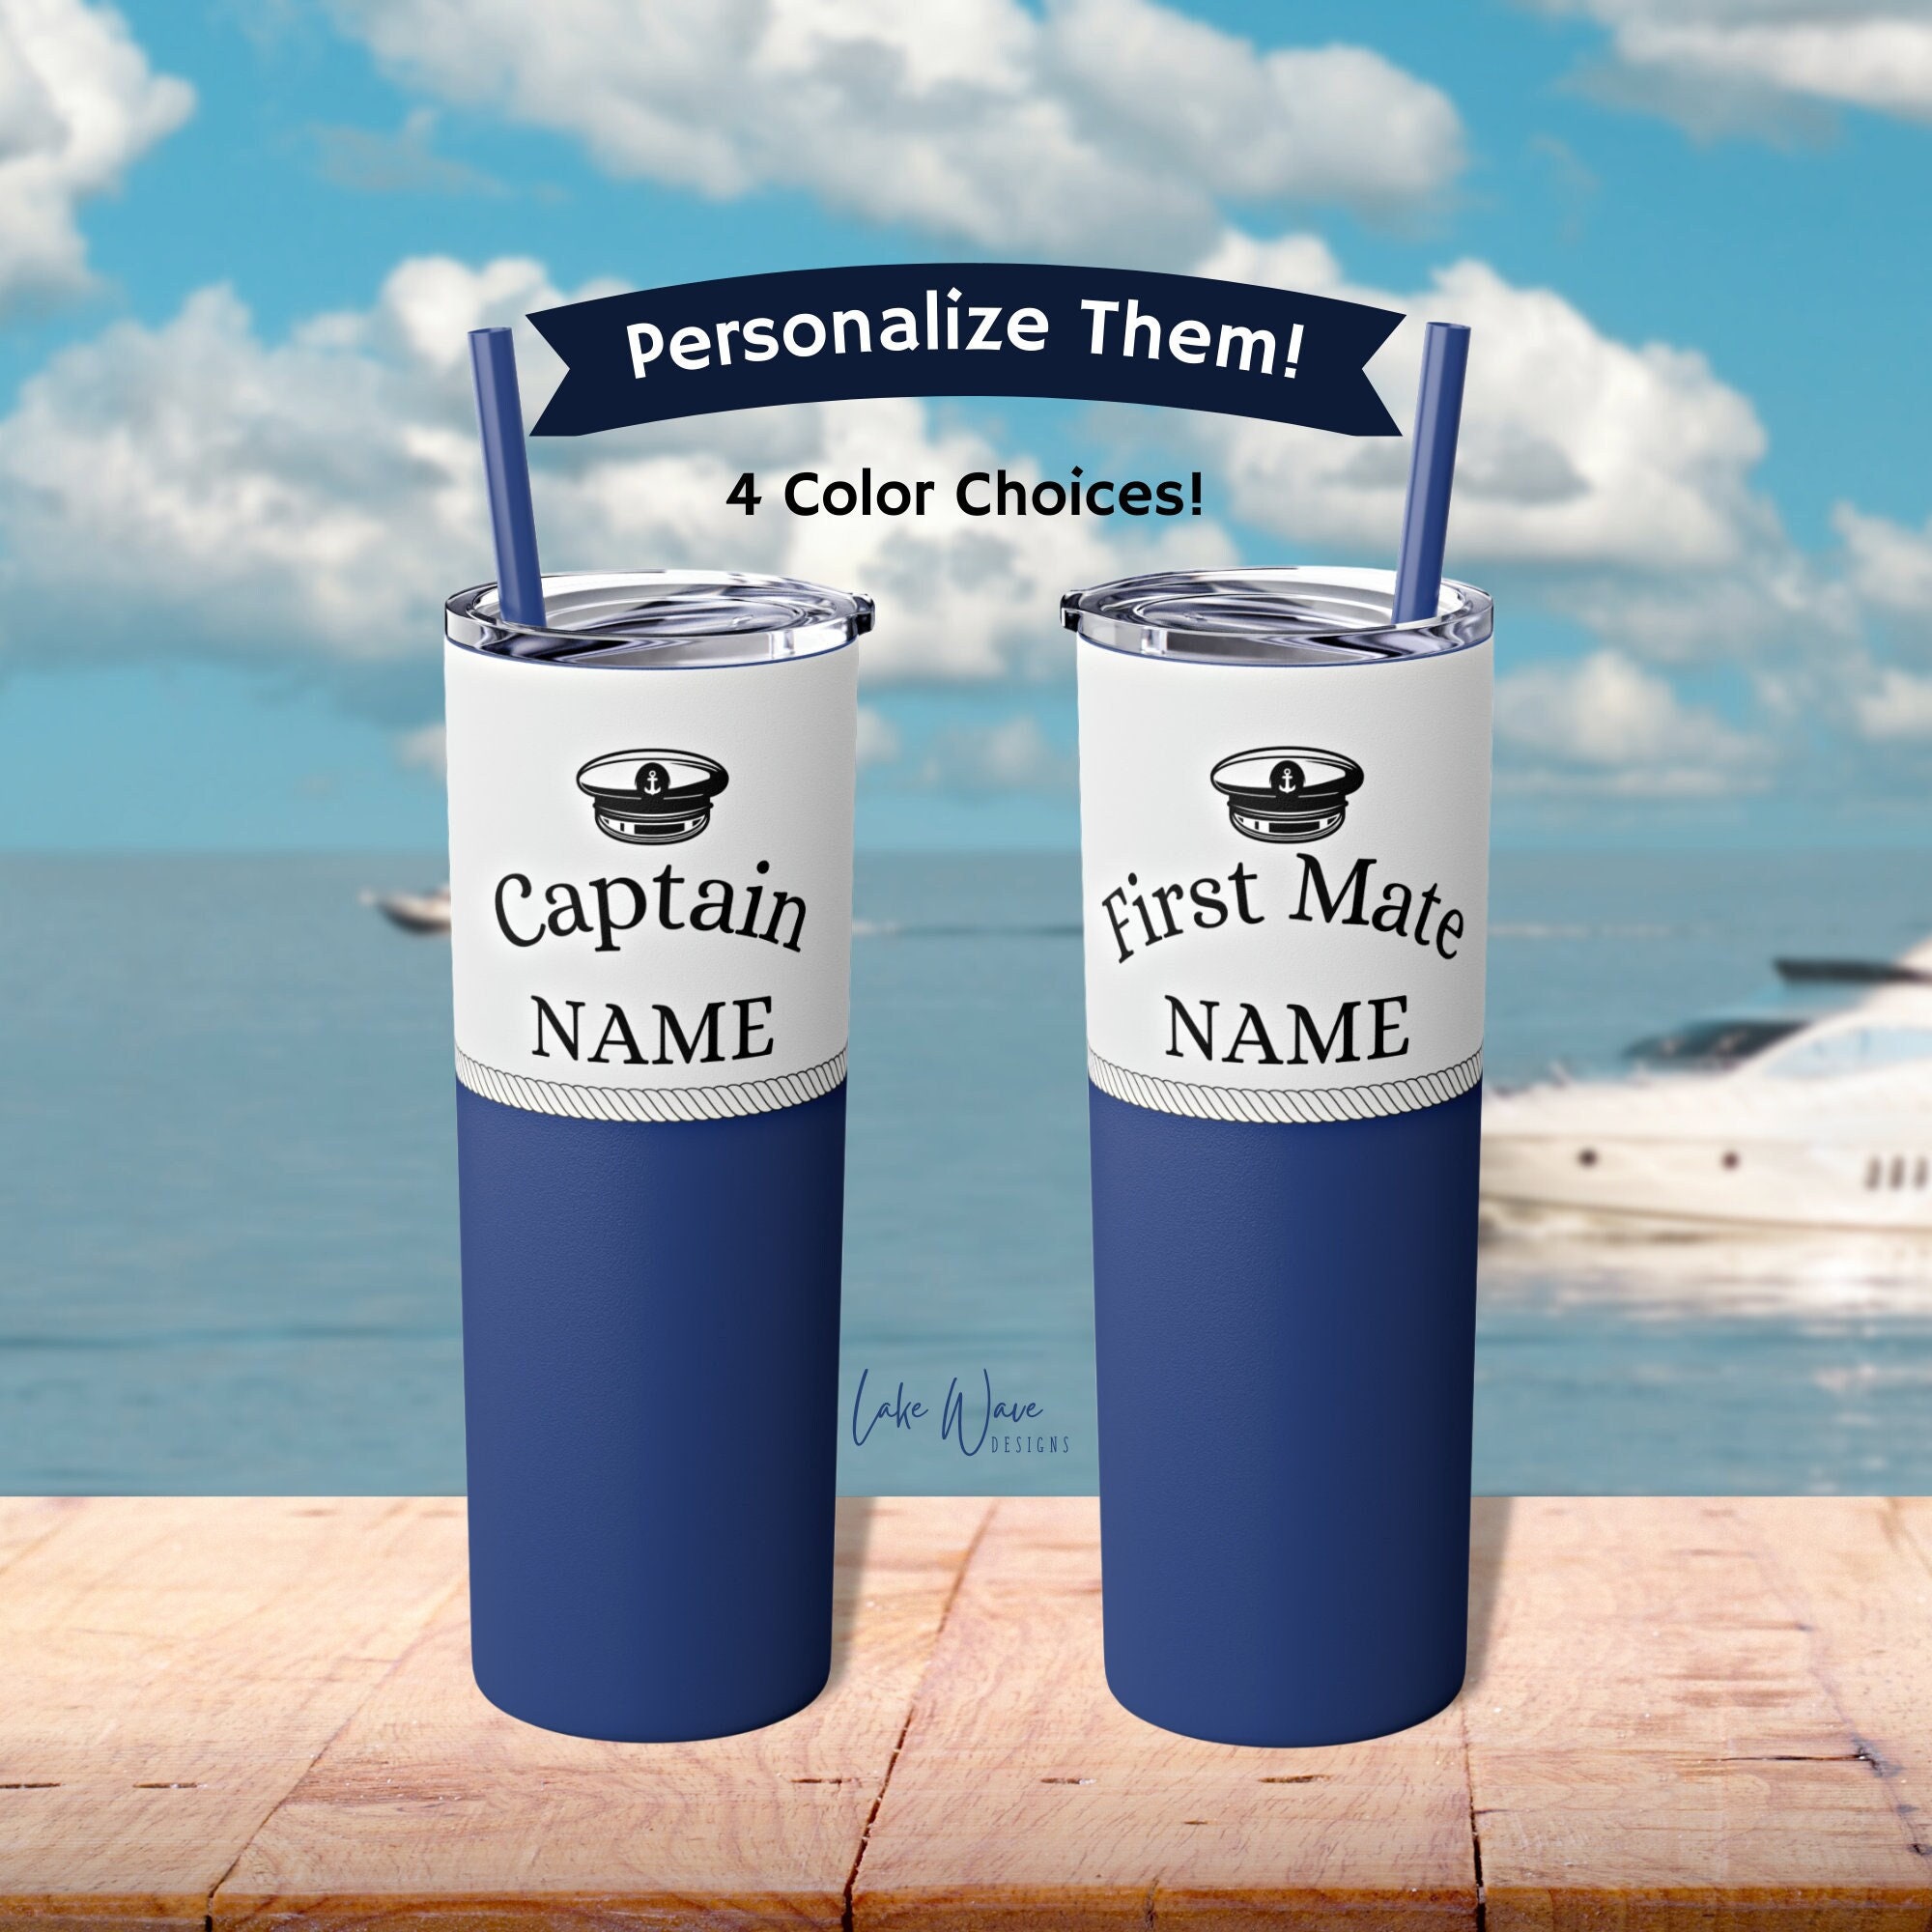 Boat Tumbler, Boat Captain, Boat Cup, Boat Gifts Personalized, Boat  Accessories, Boat Owner Gift, Boater, Sailing Gift, Yacht, Nautical Gift 